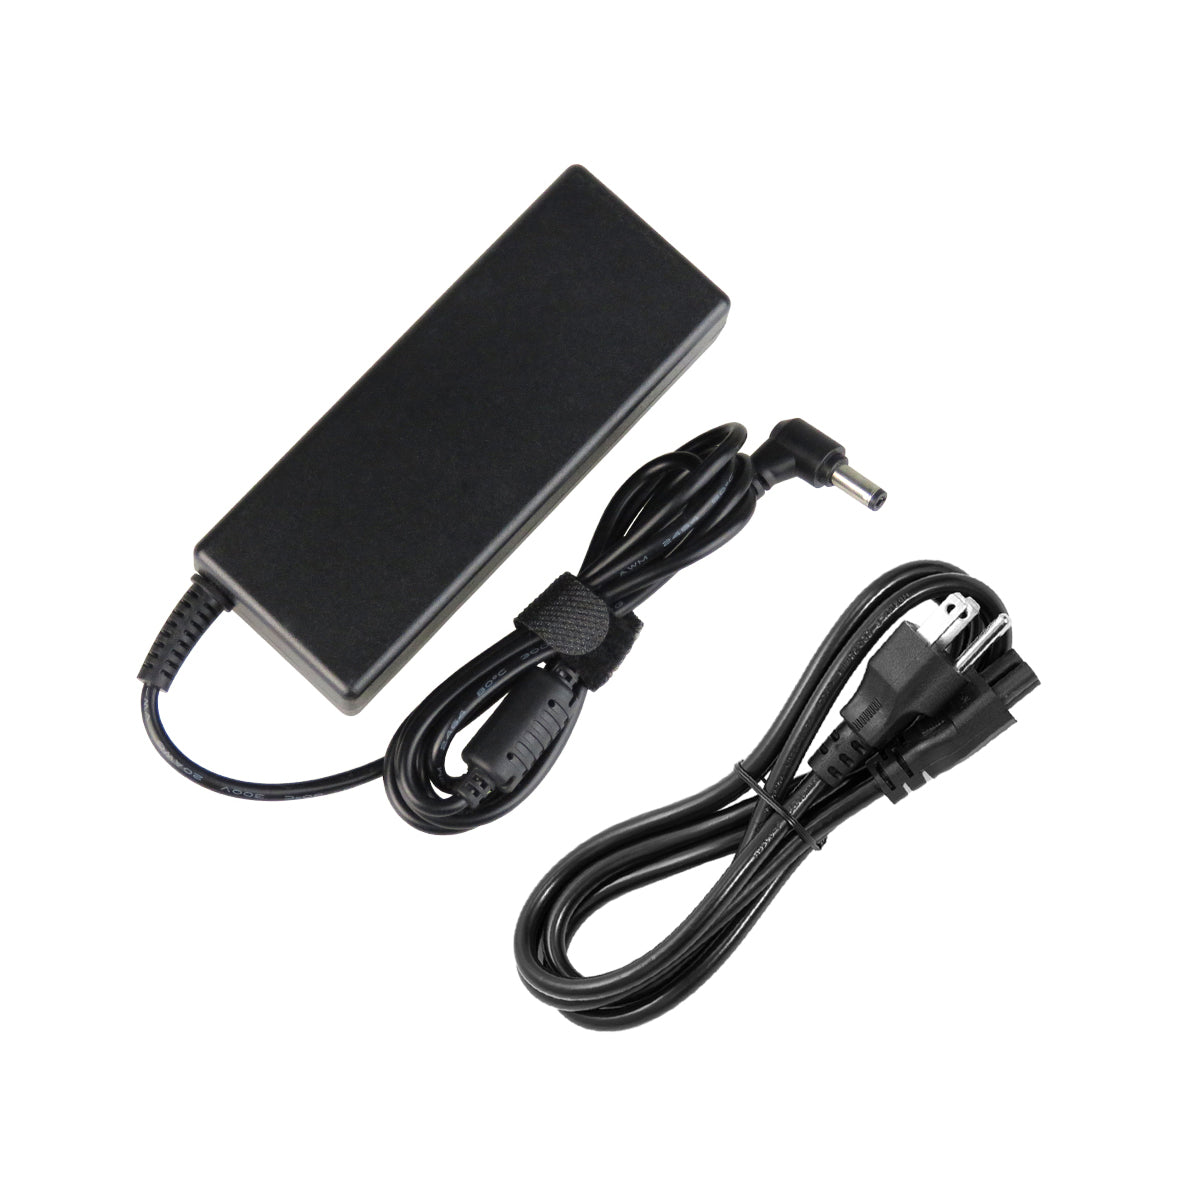 AC Adapter Charger for ASUS F74 Notebook.